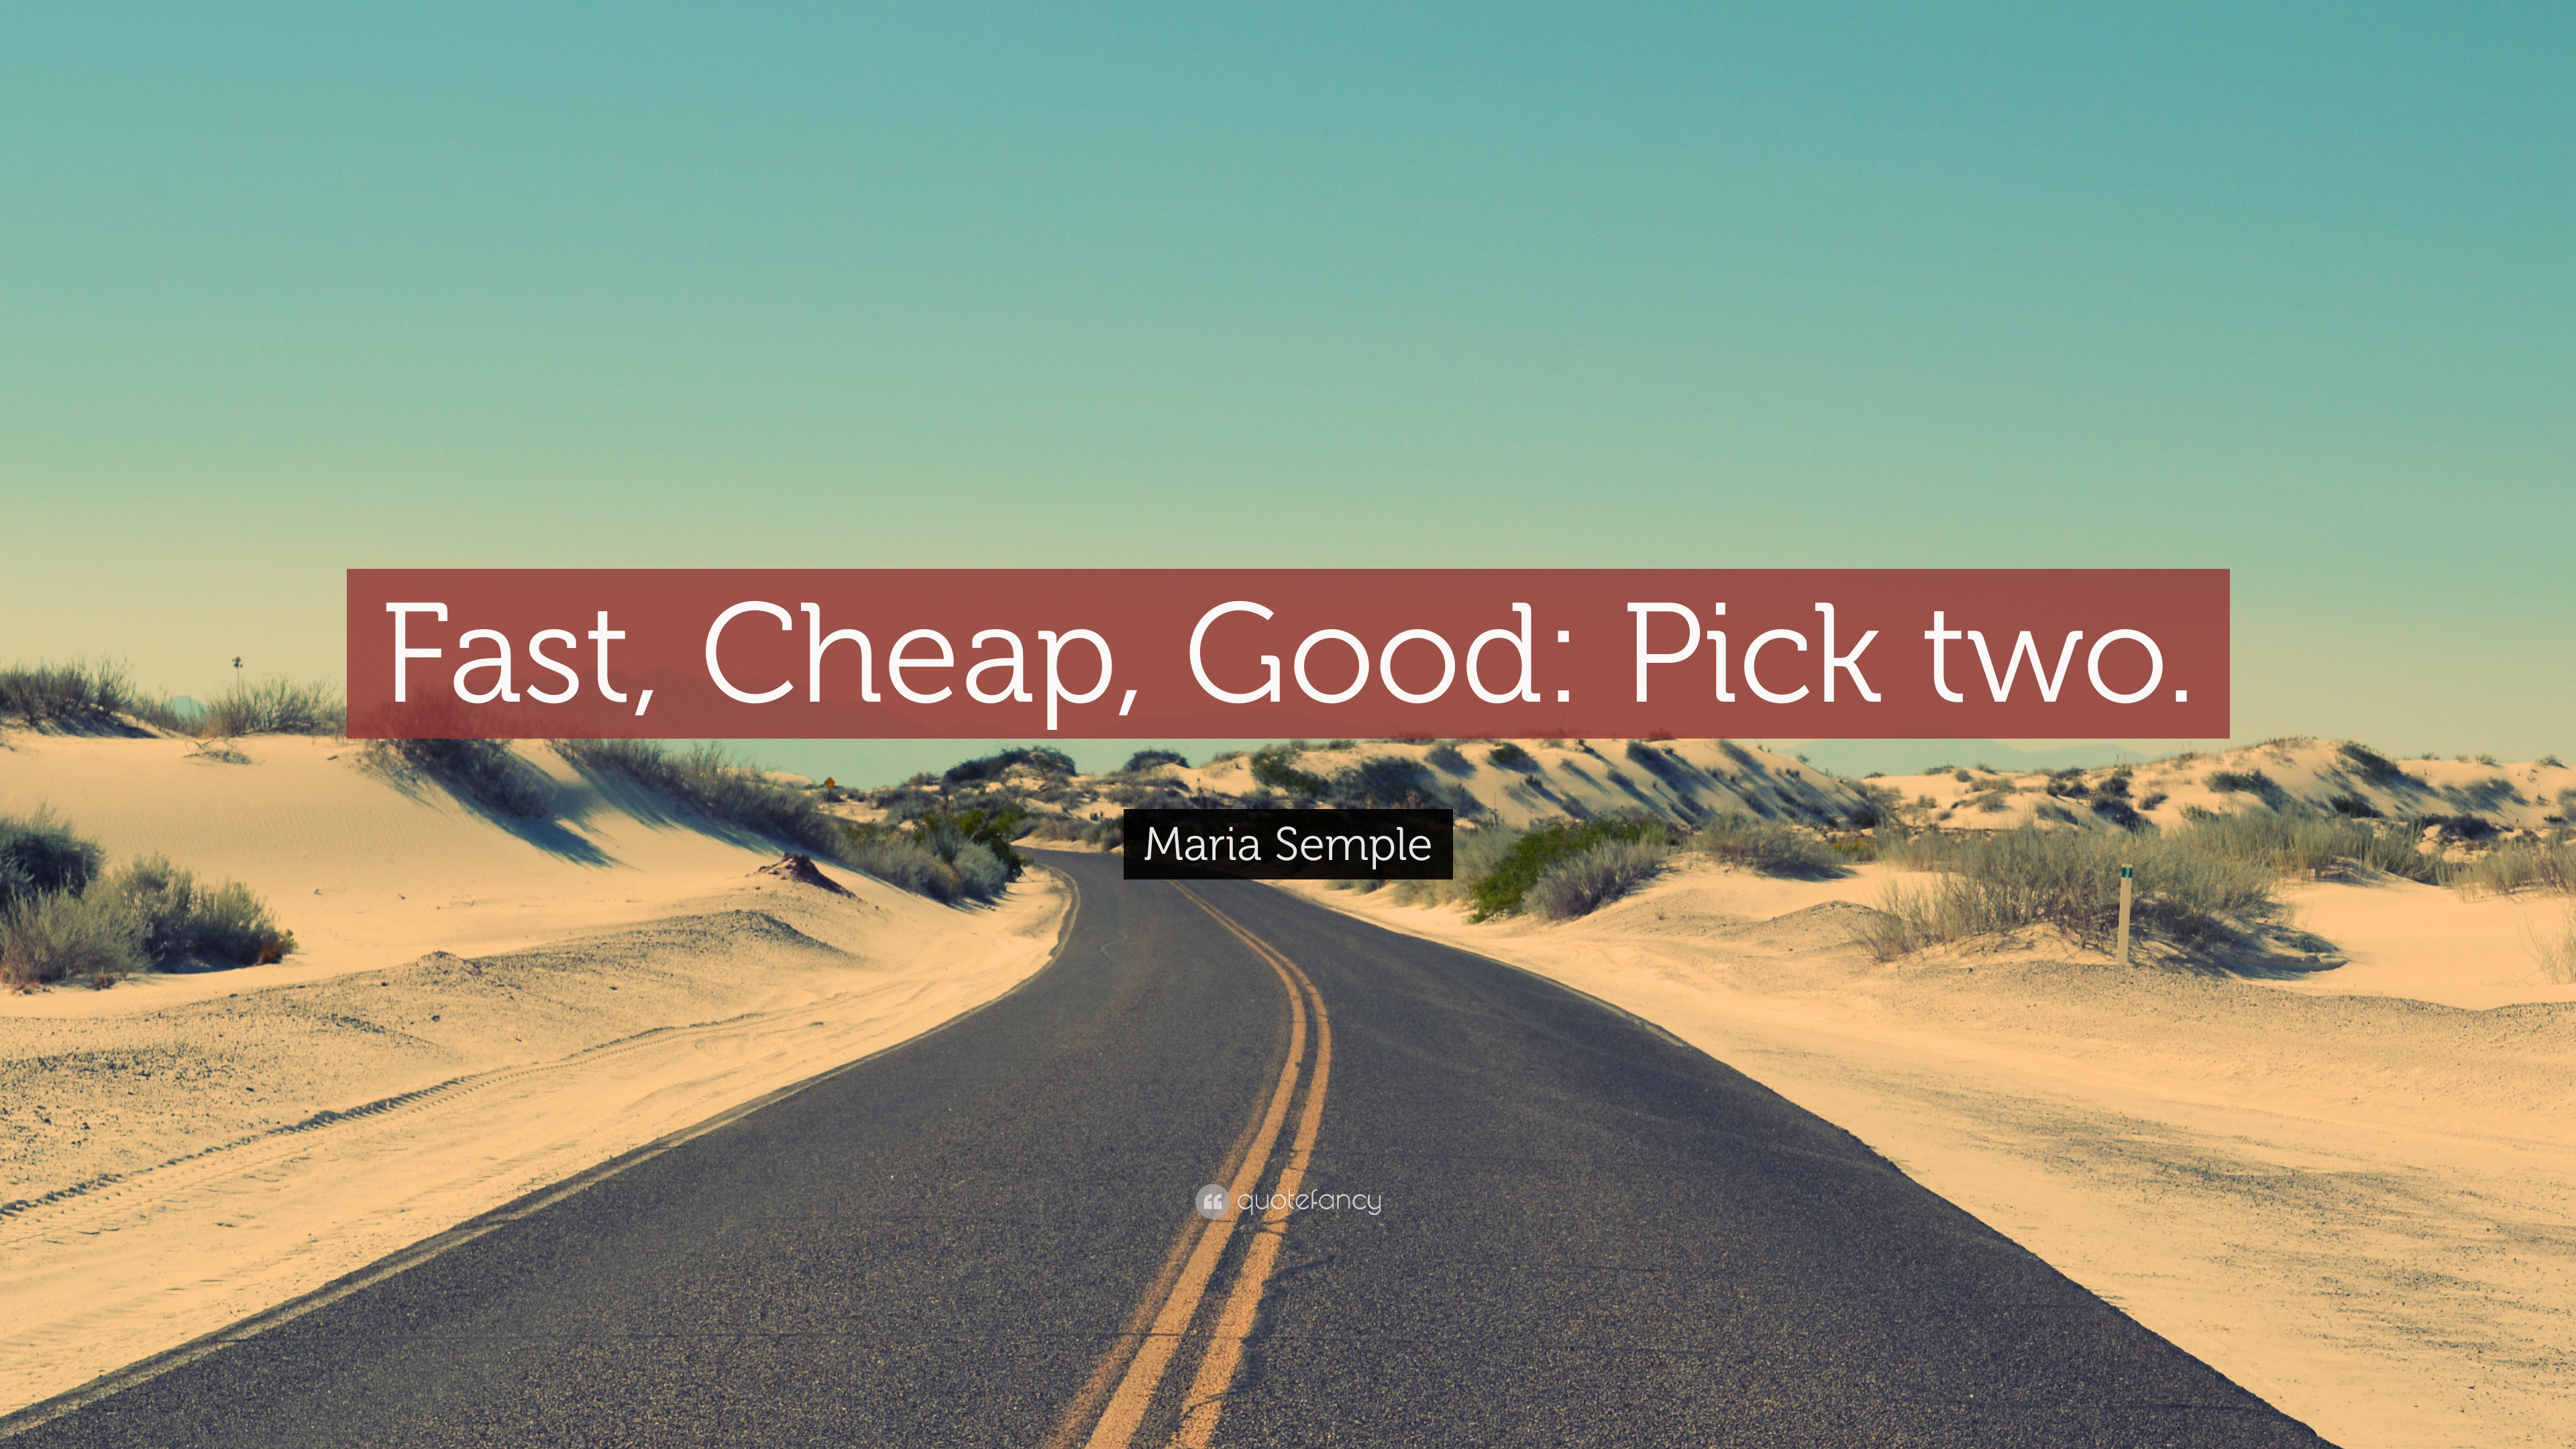 Maria Semple Quote “fast Cheap Good Pick Two”